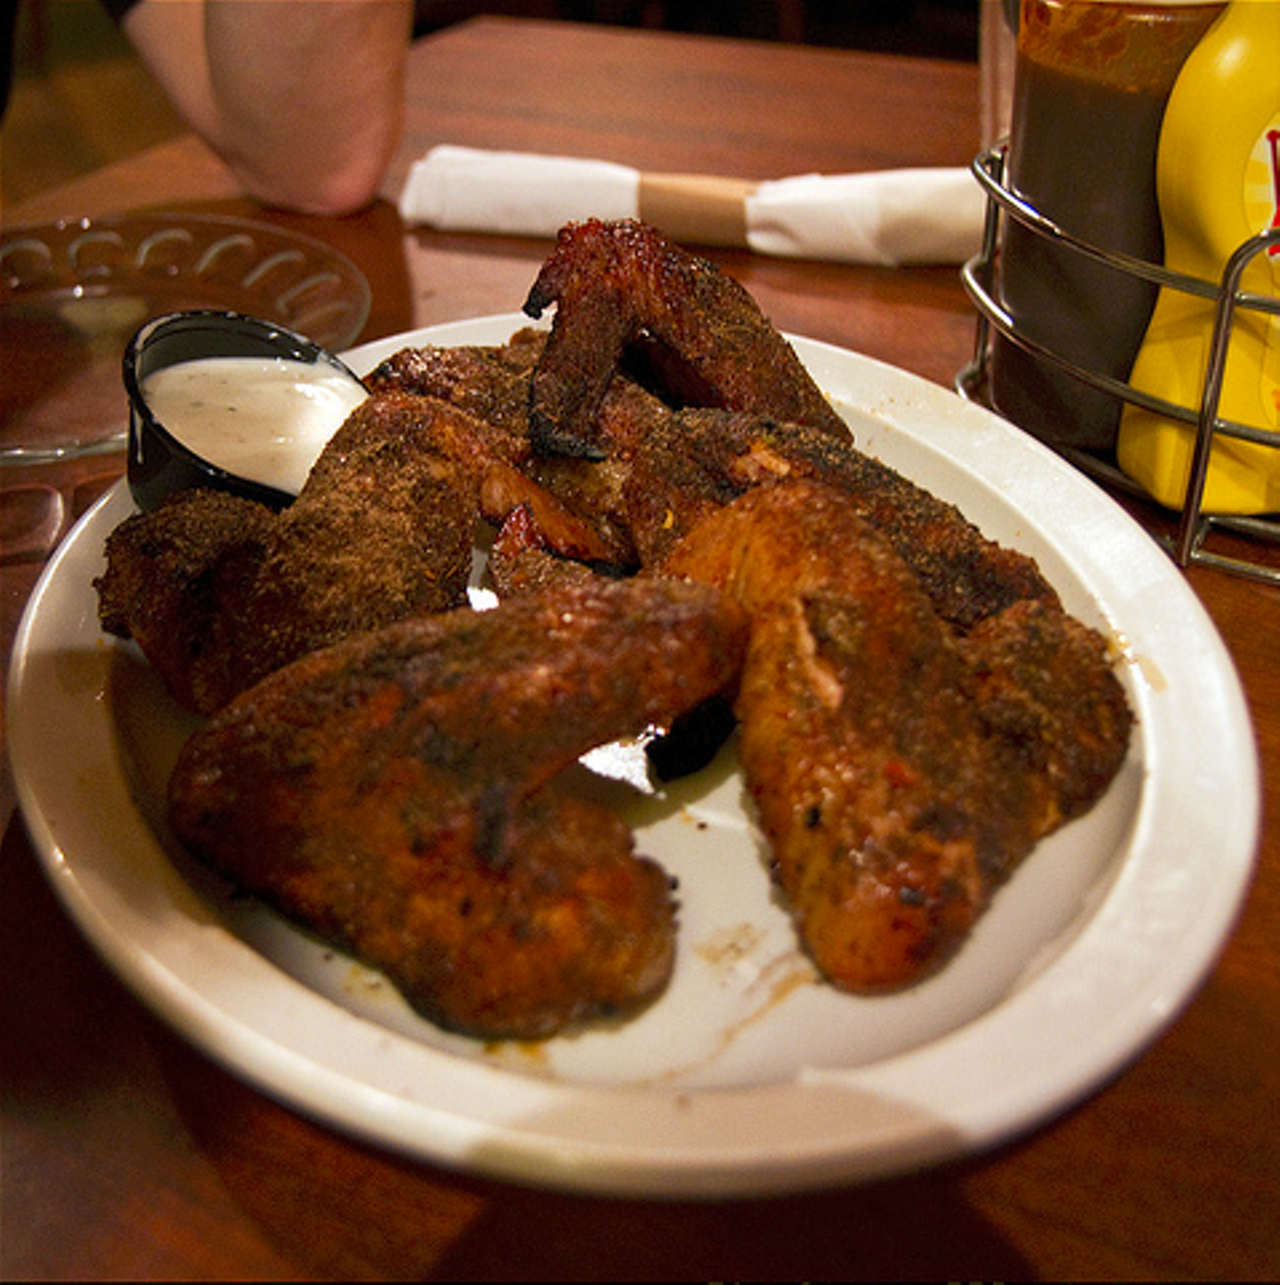 The smoked wings at Lagerhead's Smokehouse & Brewery are well worth the trip to Medina. Smoked low and slow, these whole wings are both dry rubbed and grilled. We endorse the garlic Parmesan to finish. Lagerhead's Smokehouse & Brewery is located at 2832 Abbeyville Rd, Medina. Call 330-725-1947 for more information.